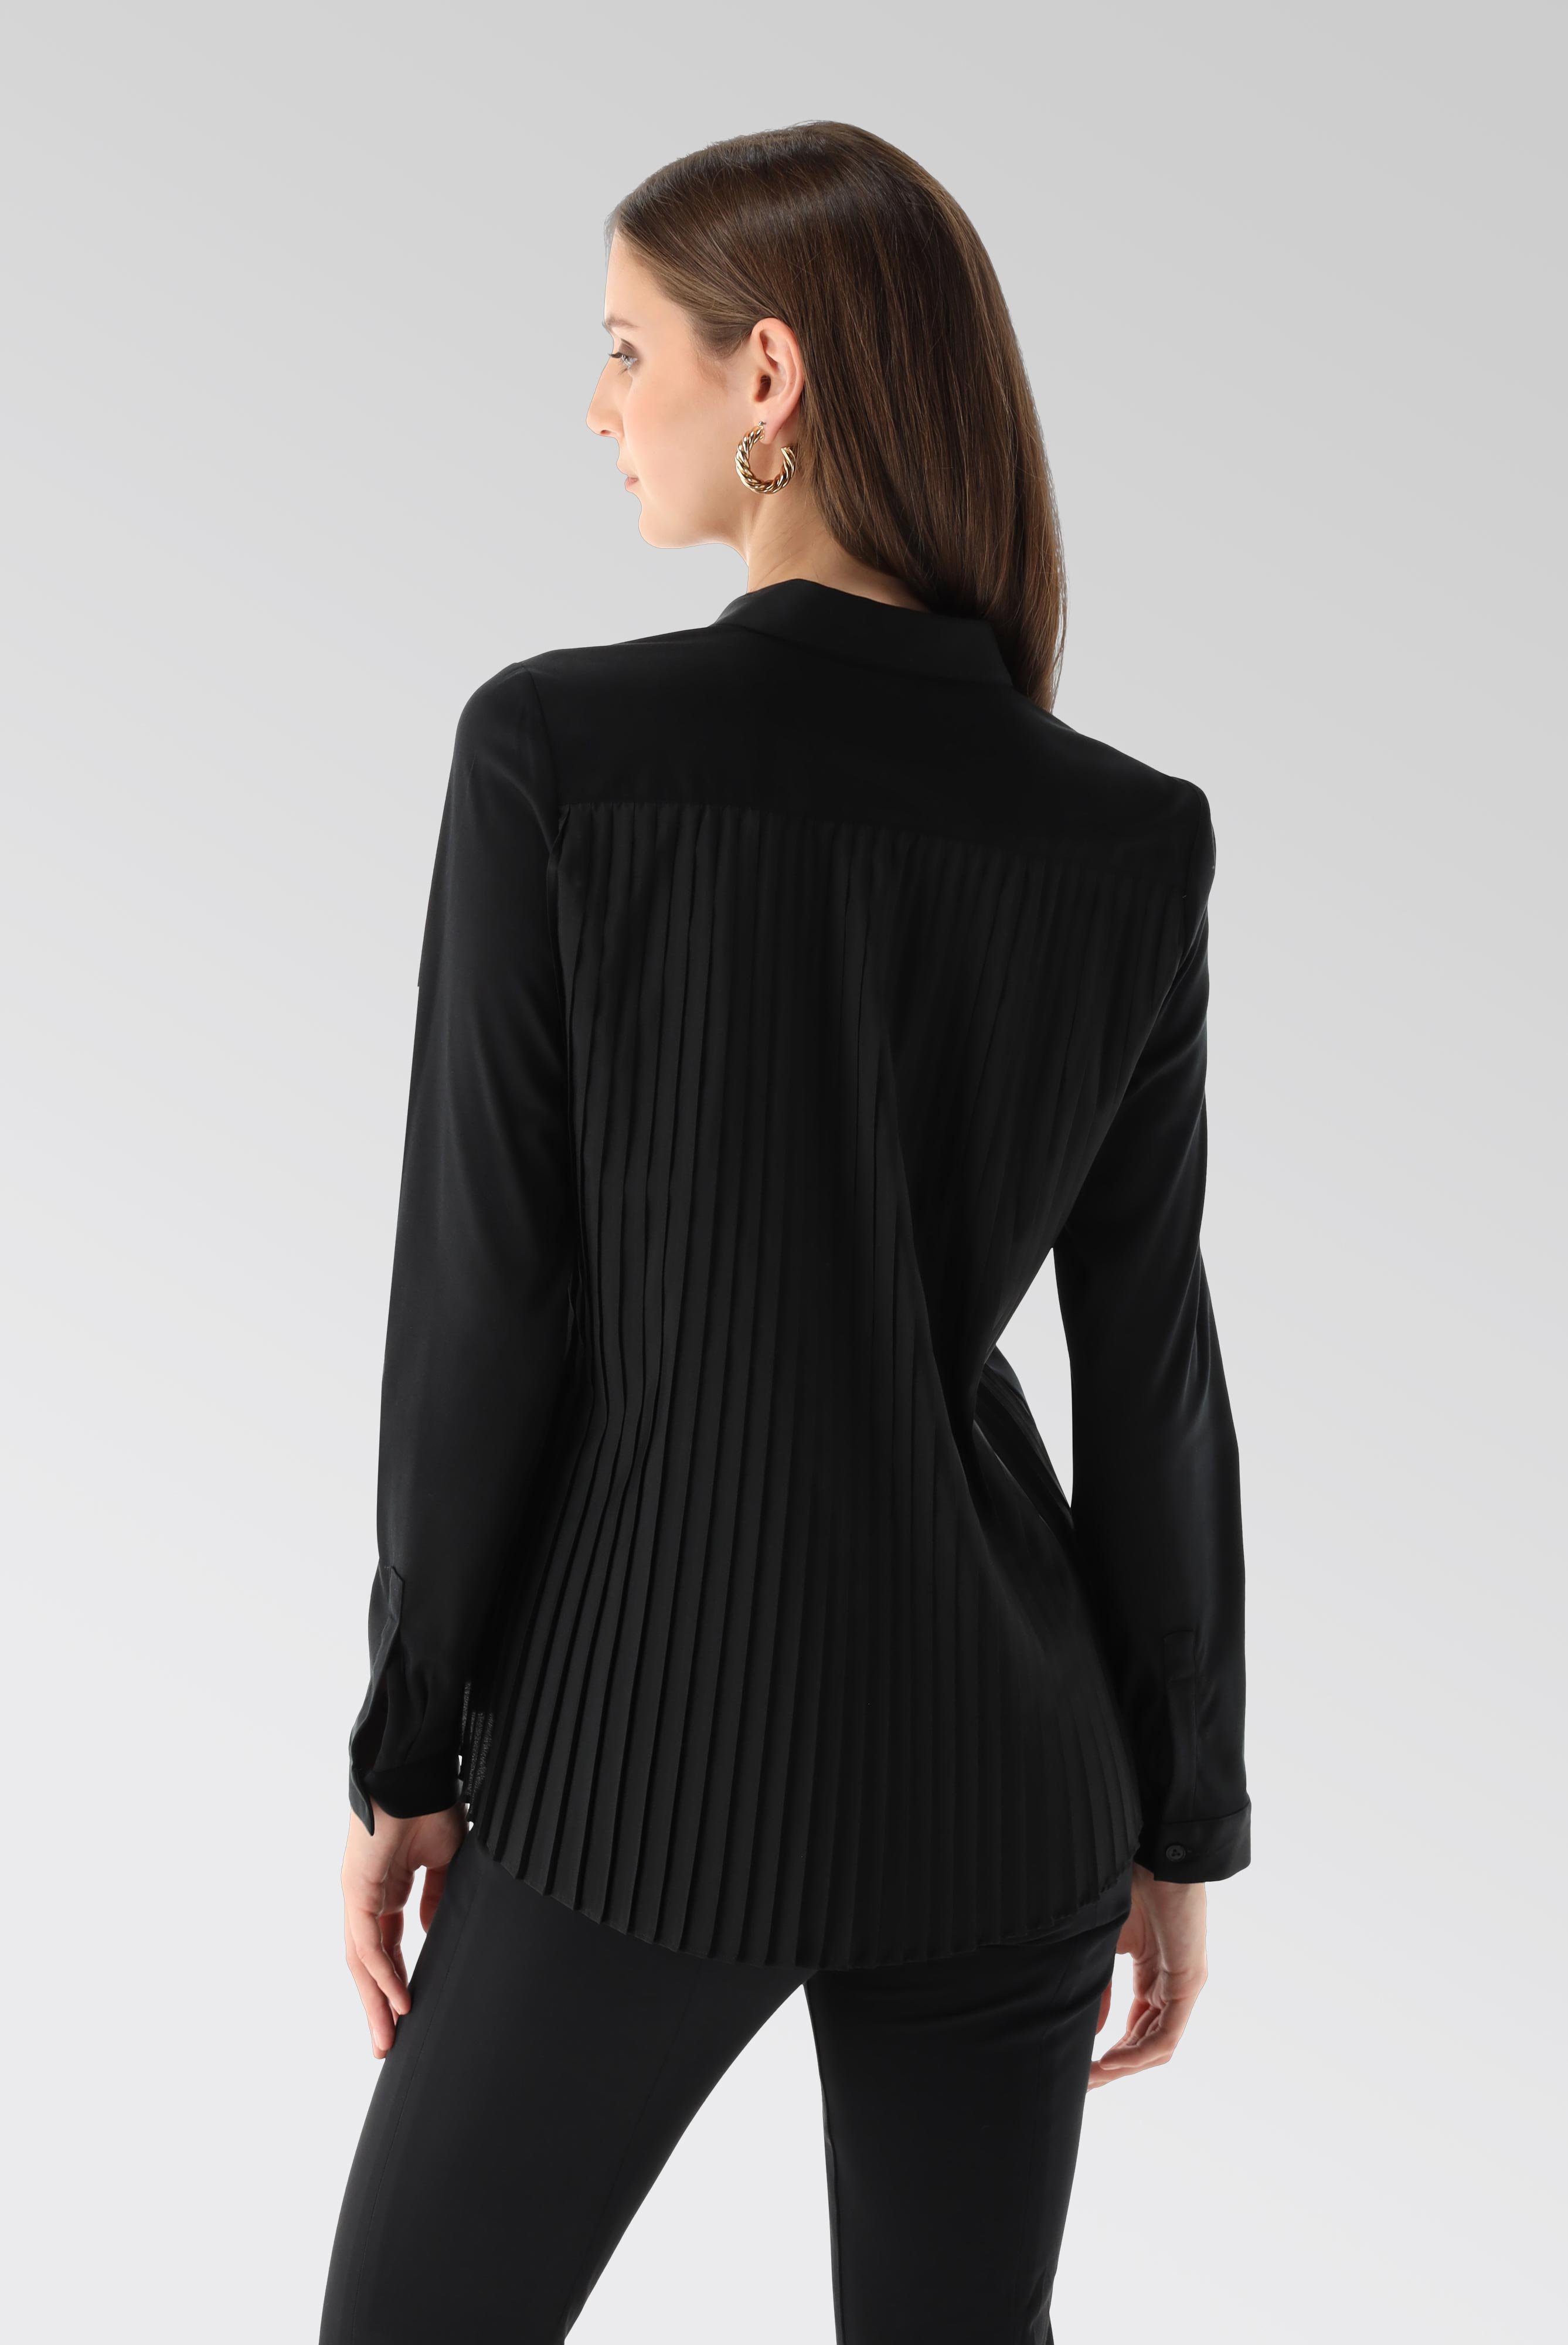 Jersey Blouses+Swiss Cotton Blouse with Pleated Back+05.6703.18.180031.099.34